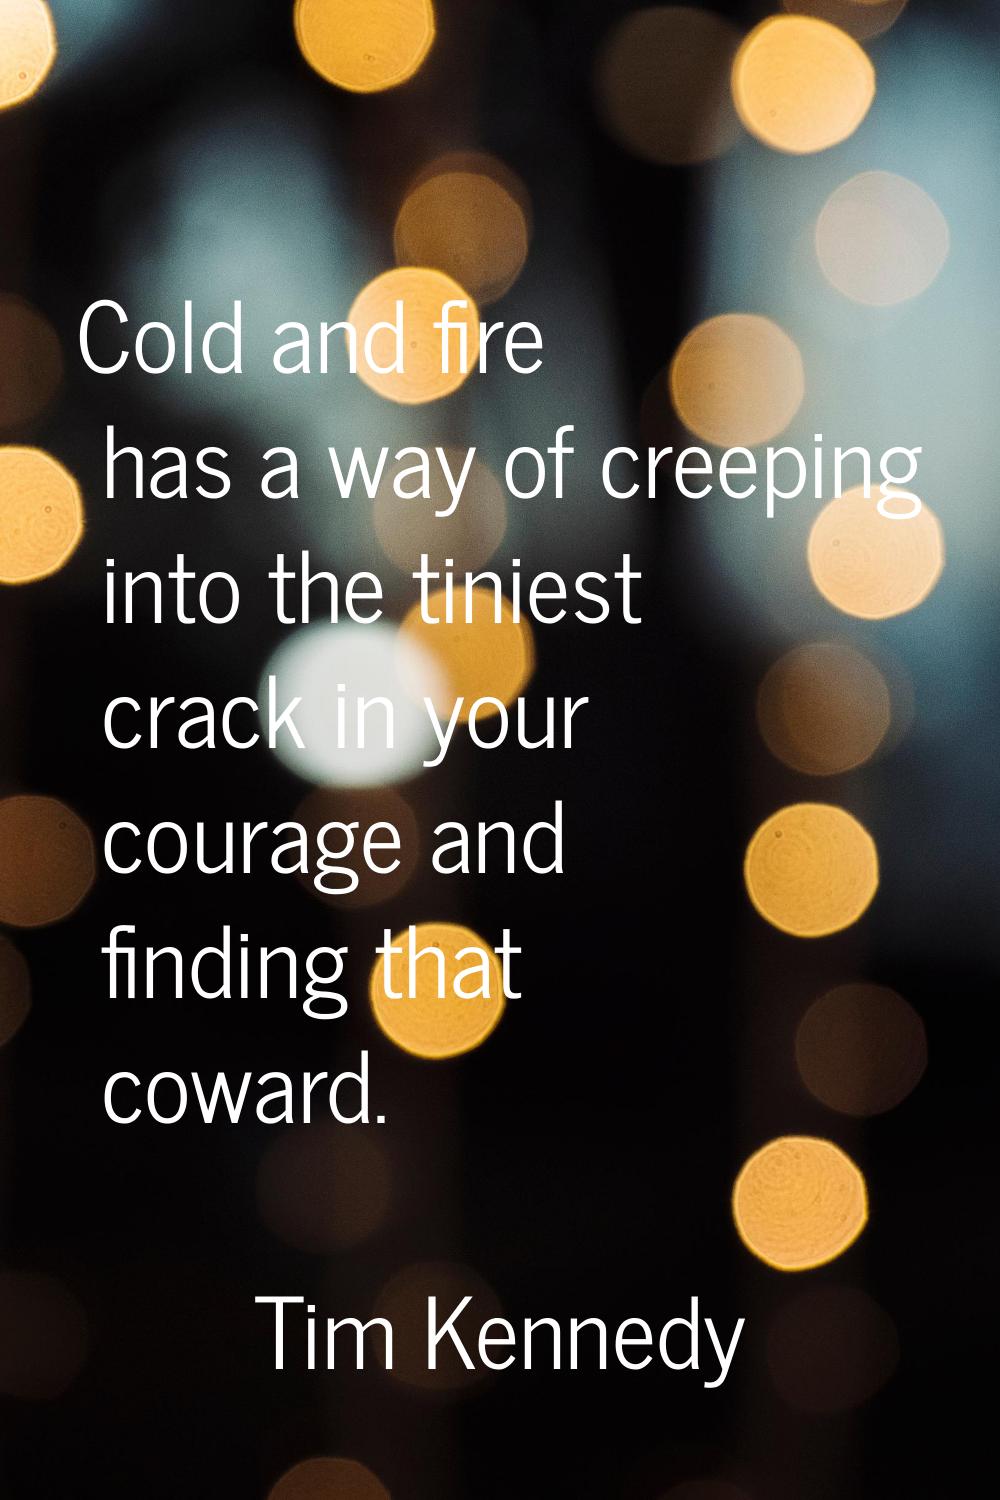 Cold and fire has a way of creeping into the tiniest crack in your courage and finding that coward.